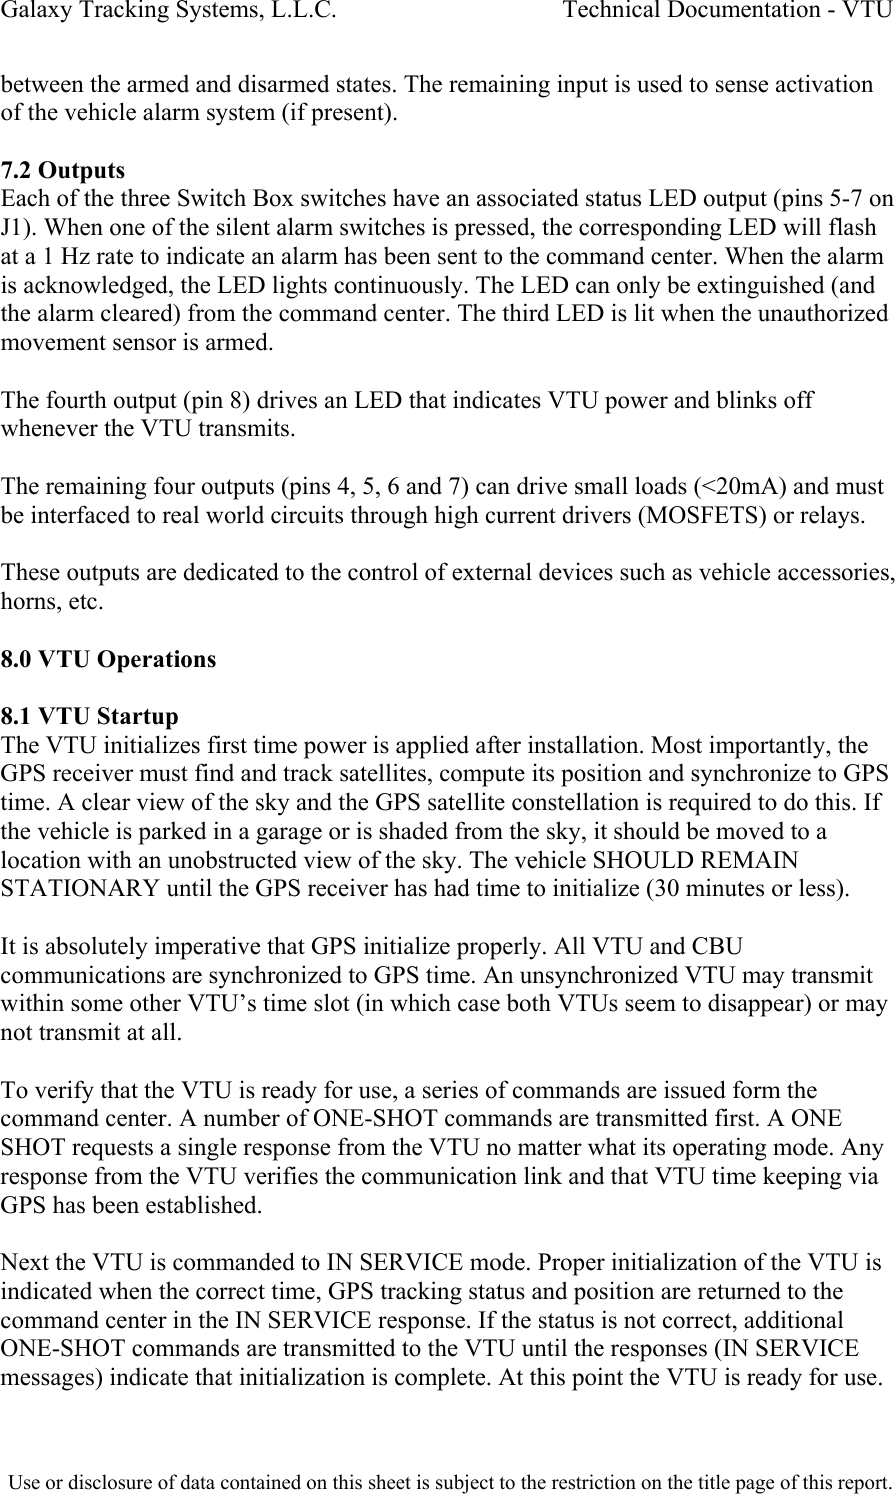 Galaxy Tracking Systems, L.L.C.                                    Technical Documentation - VTU  between the armed and disarmed states. The remaining input is used to sense activation of the vehicle alarm system (if present).  7.2 Outputs Each of the three Switch Box switches have an associated status LED output (pins 5-7 on J1). When one of the silent alarm switches is pressed, the corresponding LED will flash at a 1 Hz rate to indicate an alarm has been sent to the command center. When the alarm is acknowledged, the LED lights continuously. The LED can only be extinguished (and the alarm cleared) from the command center. The third LED is lit when the unauthorized movement sensor is armed.  The fourth output (pin 8) drives an LED that indicates VTU power and blinks off whenever the VTU transmits.  The remaining four outputs (pins 4, 5, 6 and 7) can drive small loads (&lt;20mA) and must be interfaced to real world circuits through high current drivers (MOSFETS) or relays.  These outputs are dedicated to the control of external devices such as vehicle accessories, horns, etc.   8.0 VTU Operations  8.1 VTU Startup The VTU initializes first time power is applied after installation. Most importantly, the GPS receiver must find and track satellites, compute its position and synchronize to GPS time. A clear view of the sky and the GPS satellite constellation is required to do this. If the vehicle is parked in a garage or is shaded from the sky, it should be moved to a location with an unobstructed view of the sky. The vehicle SHOULD REMAIN STATIONARY until the GPS receiver has had time to initialize (30 minutes or less).  It is absolutely imperative that GPS initialize properly. All VTU and CBU communications are synchronized to GPS time. An unsynchronized VTU may transmit within some other VTU’s time slot (in which case both VTUs seem to disappear) or may not transmit at all.  To verify that the VTU is ready for use, a series of commands are issued form the command center. A number of ONE-SHOT commands are transmitted first. A ONE SHOT requests a single response from the VTU no matter what its operating mode. Any response from the VTU verifies the communication link and that VTU time keeping via GPS has been established.  Next the VTU is commanded to IN SERVICE mode. Proper initialization of the VTU is indicated when the correct time, GPS tracking status and position are returned to the command center in the IN SERVICE response. If the status is not correct, additional ONE-SHOT commands are transmitted to the VTU until the responses (IN SERVICE messages) indicate that initialization is complete. At this point the VTU is ready for use.  Use or disclosure of data contained on this sheet is subject to the restriction on the title page of this report.  